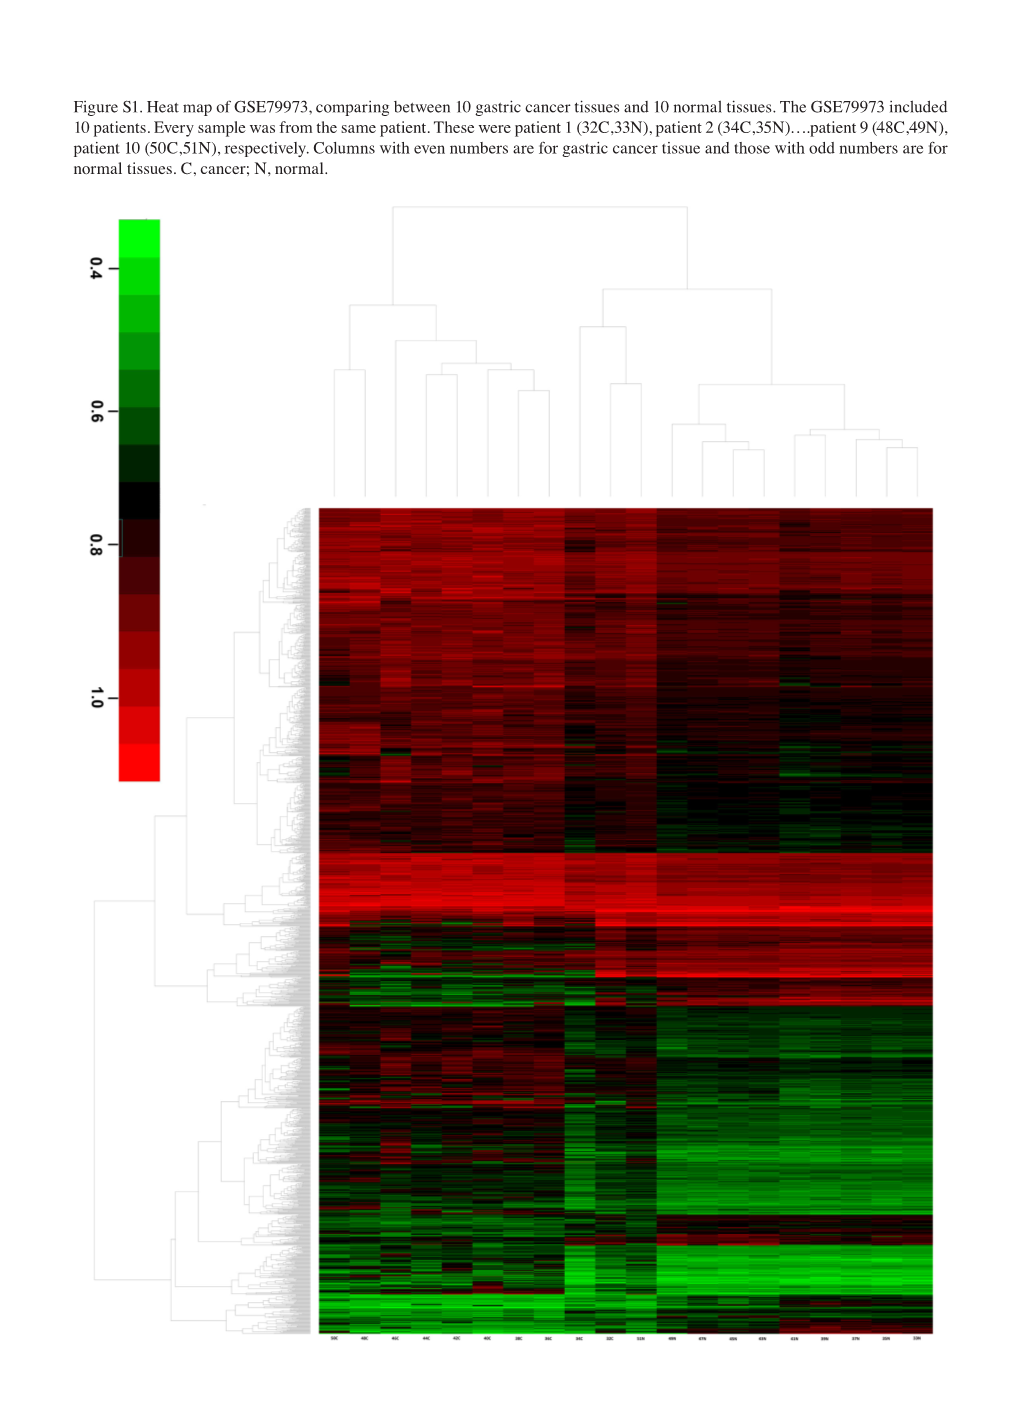 Figure S1. Heat Map of GSE79973, Comparing Between 10 Gastric Cancer Tissues and 10 Normal Tissues